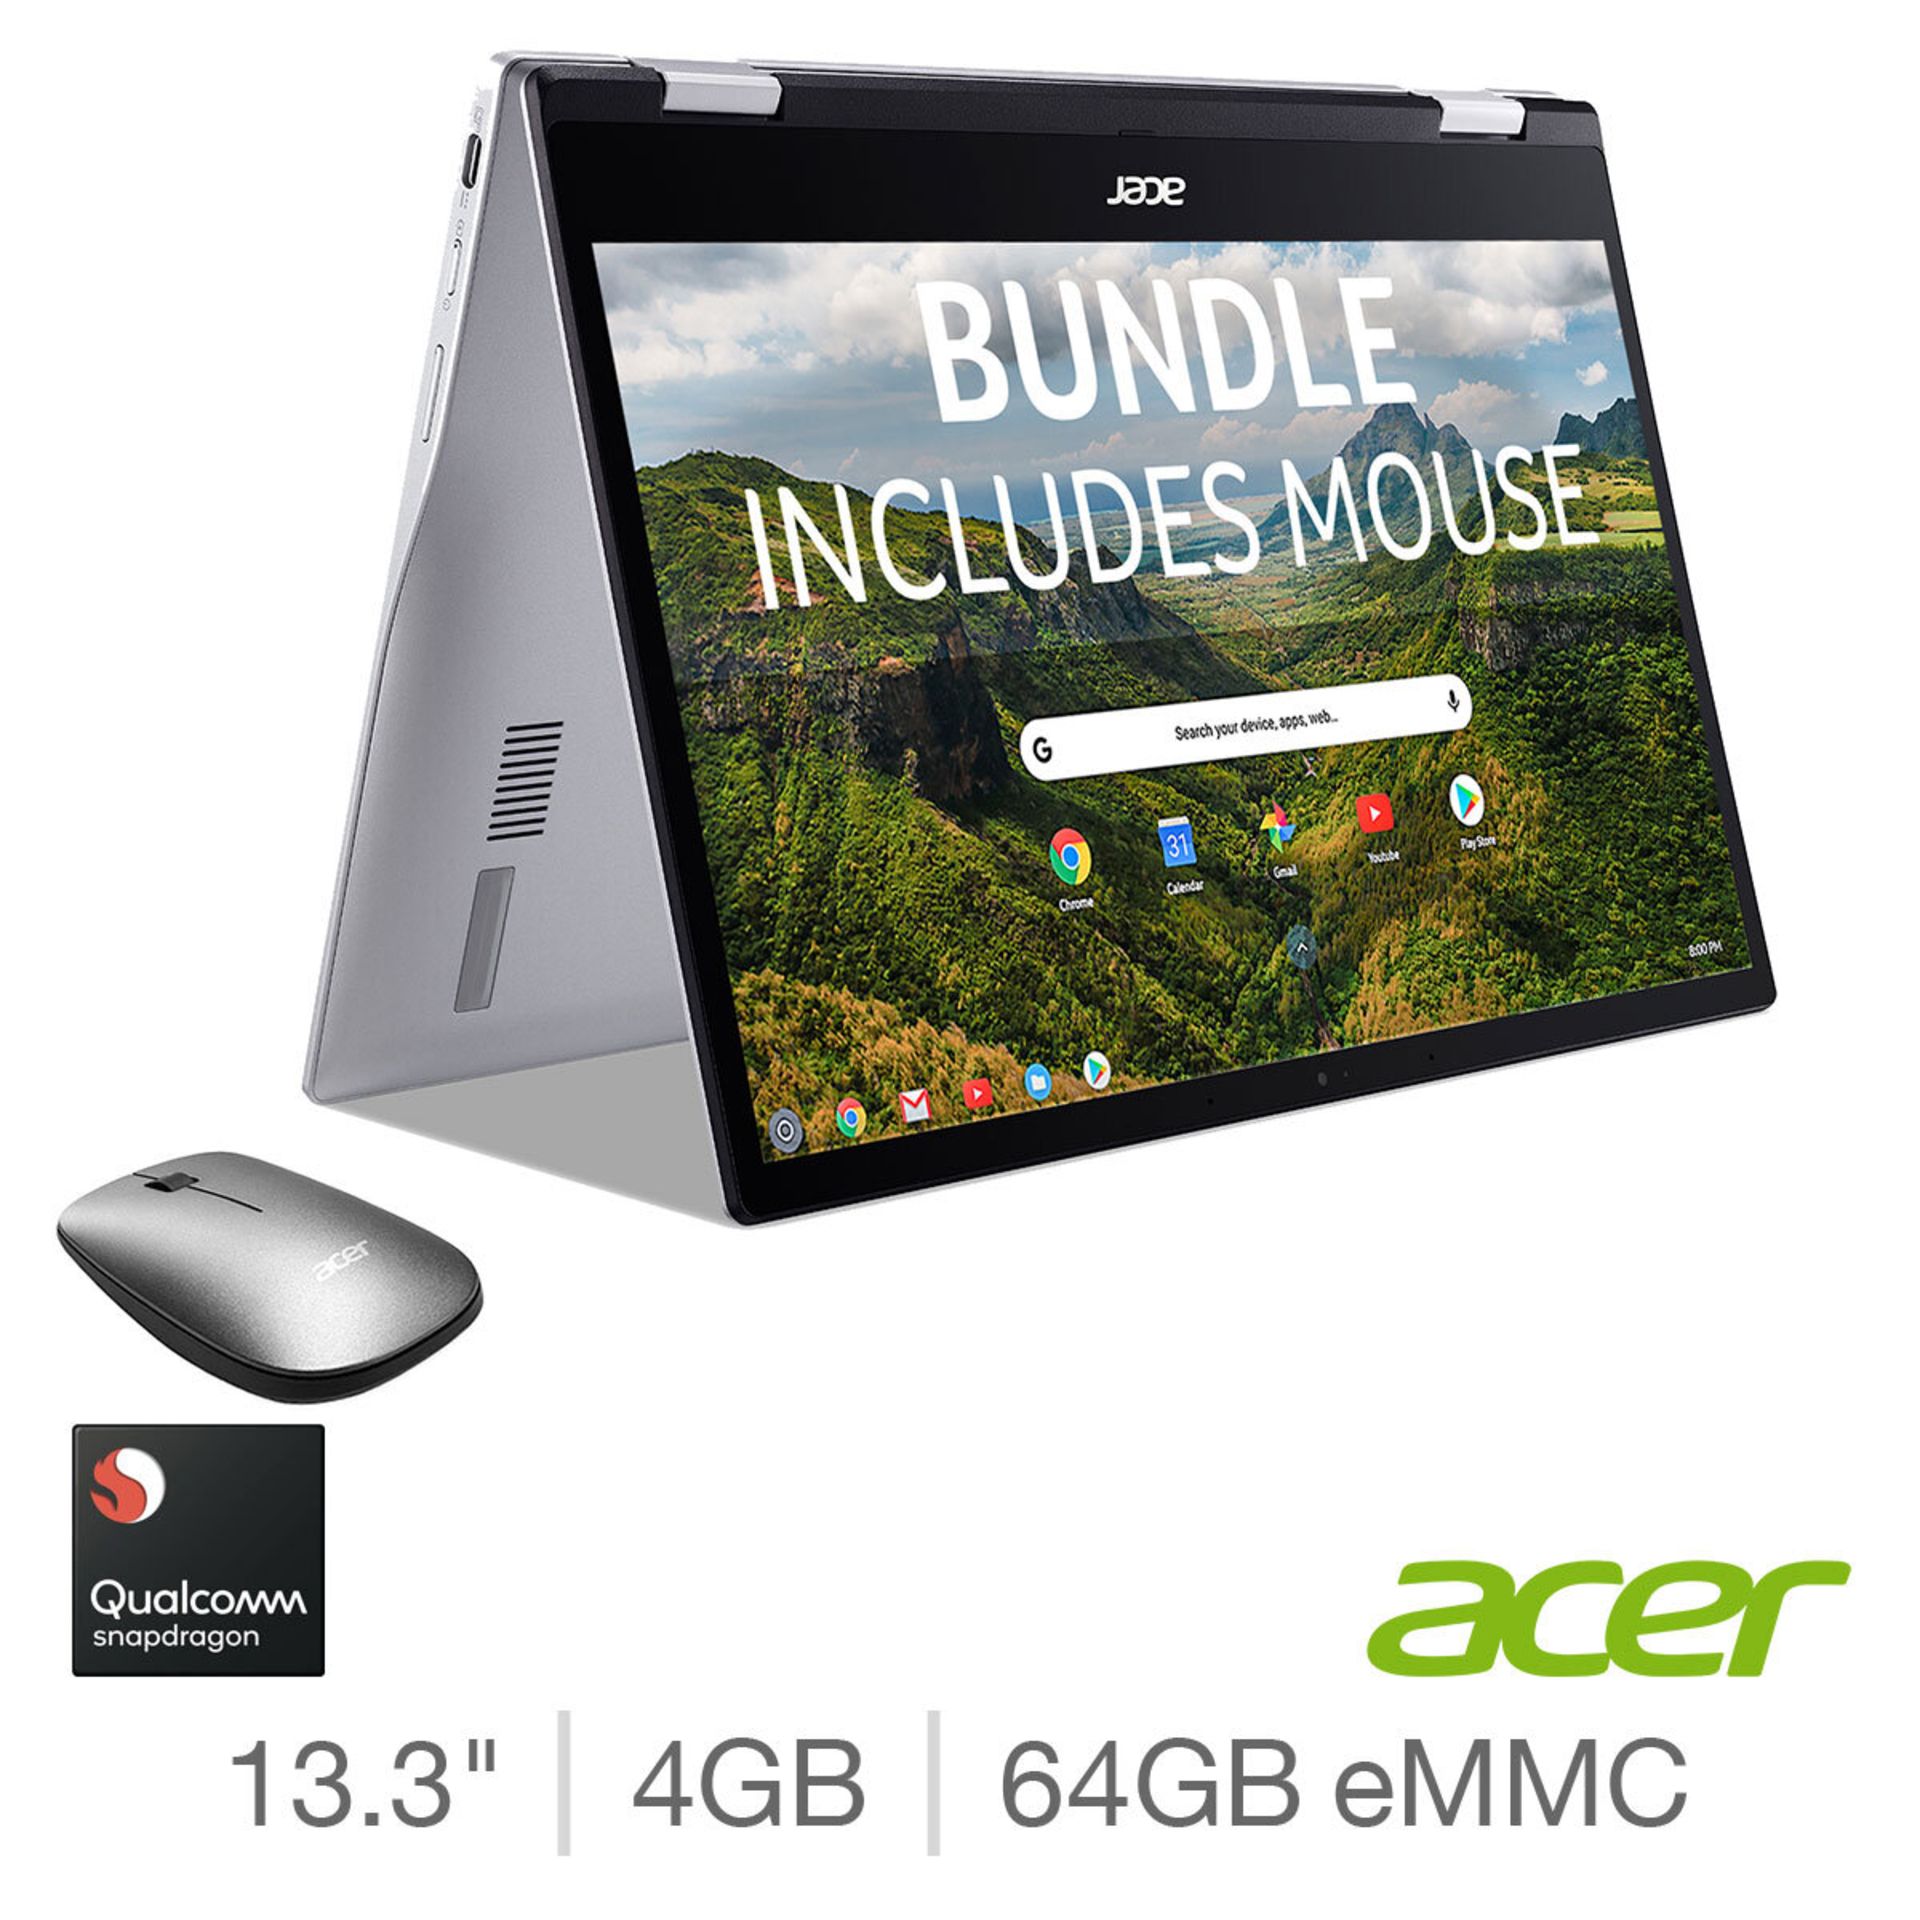 1 BOXED ACER 513, QUALCOMM SNAPDRAGON SC7180, 4GB RAM, 64GB EMMC, 13.3 INCH CONVERTIBLE 2 IN 1